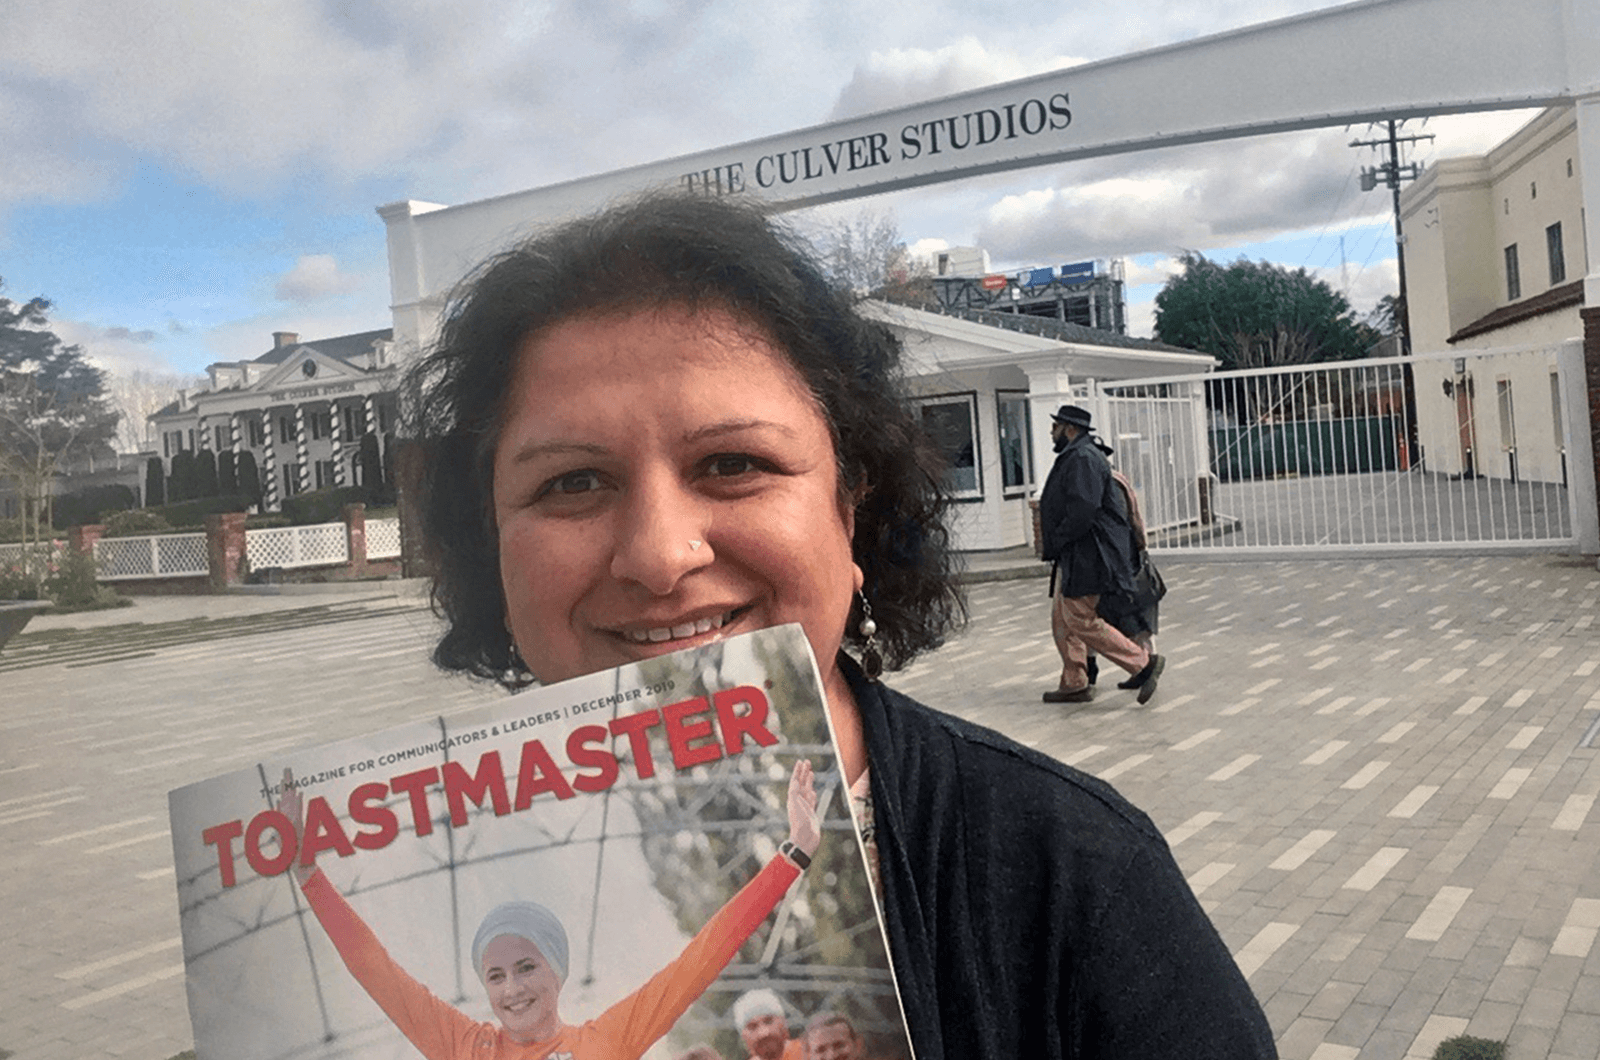 Anita Devi of Milton Keynes, England, United Kingdom, stands in front of The Culver Studios, in Culver City, California, on Boxing Day 2019.